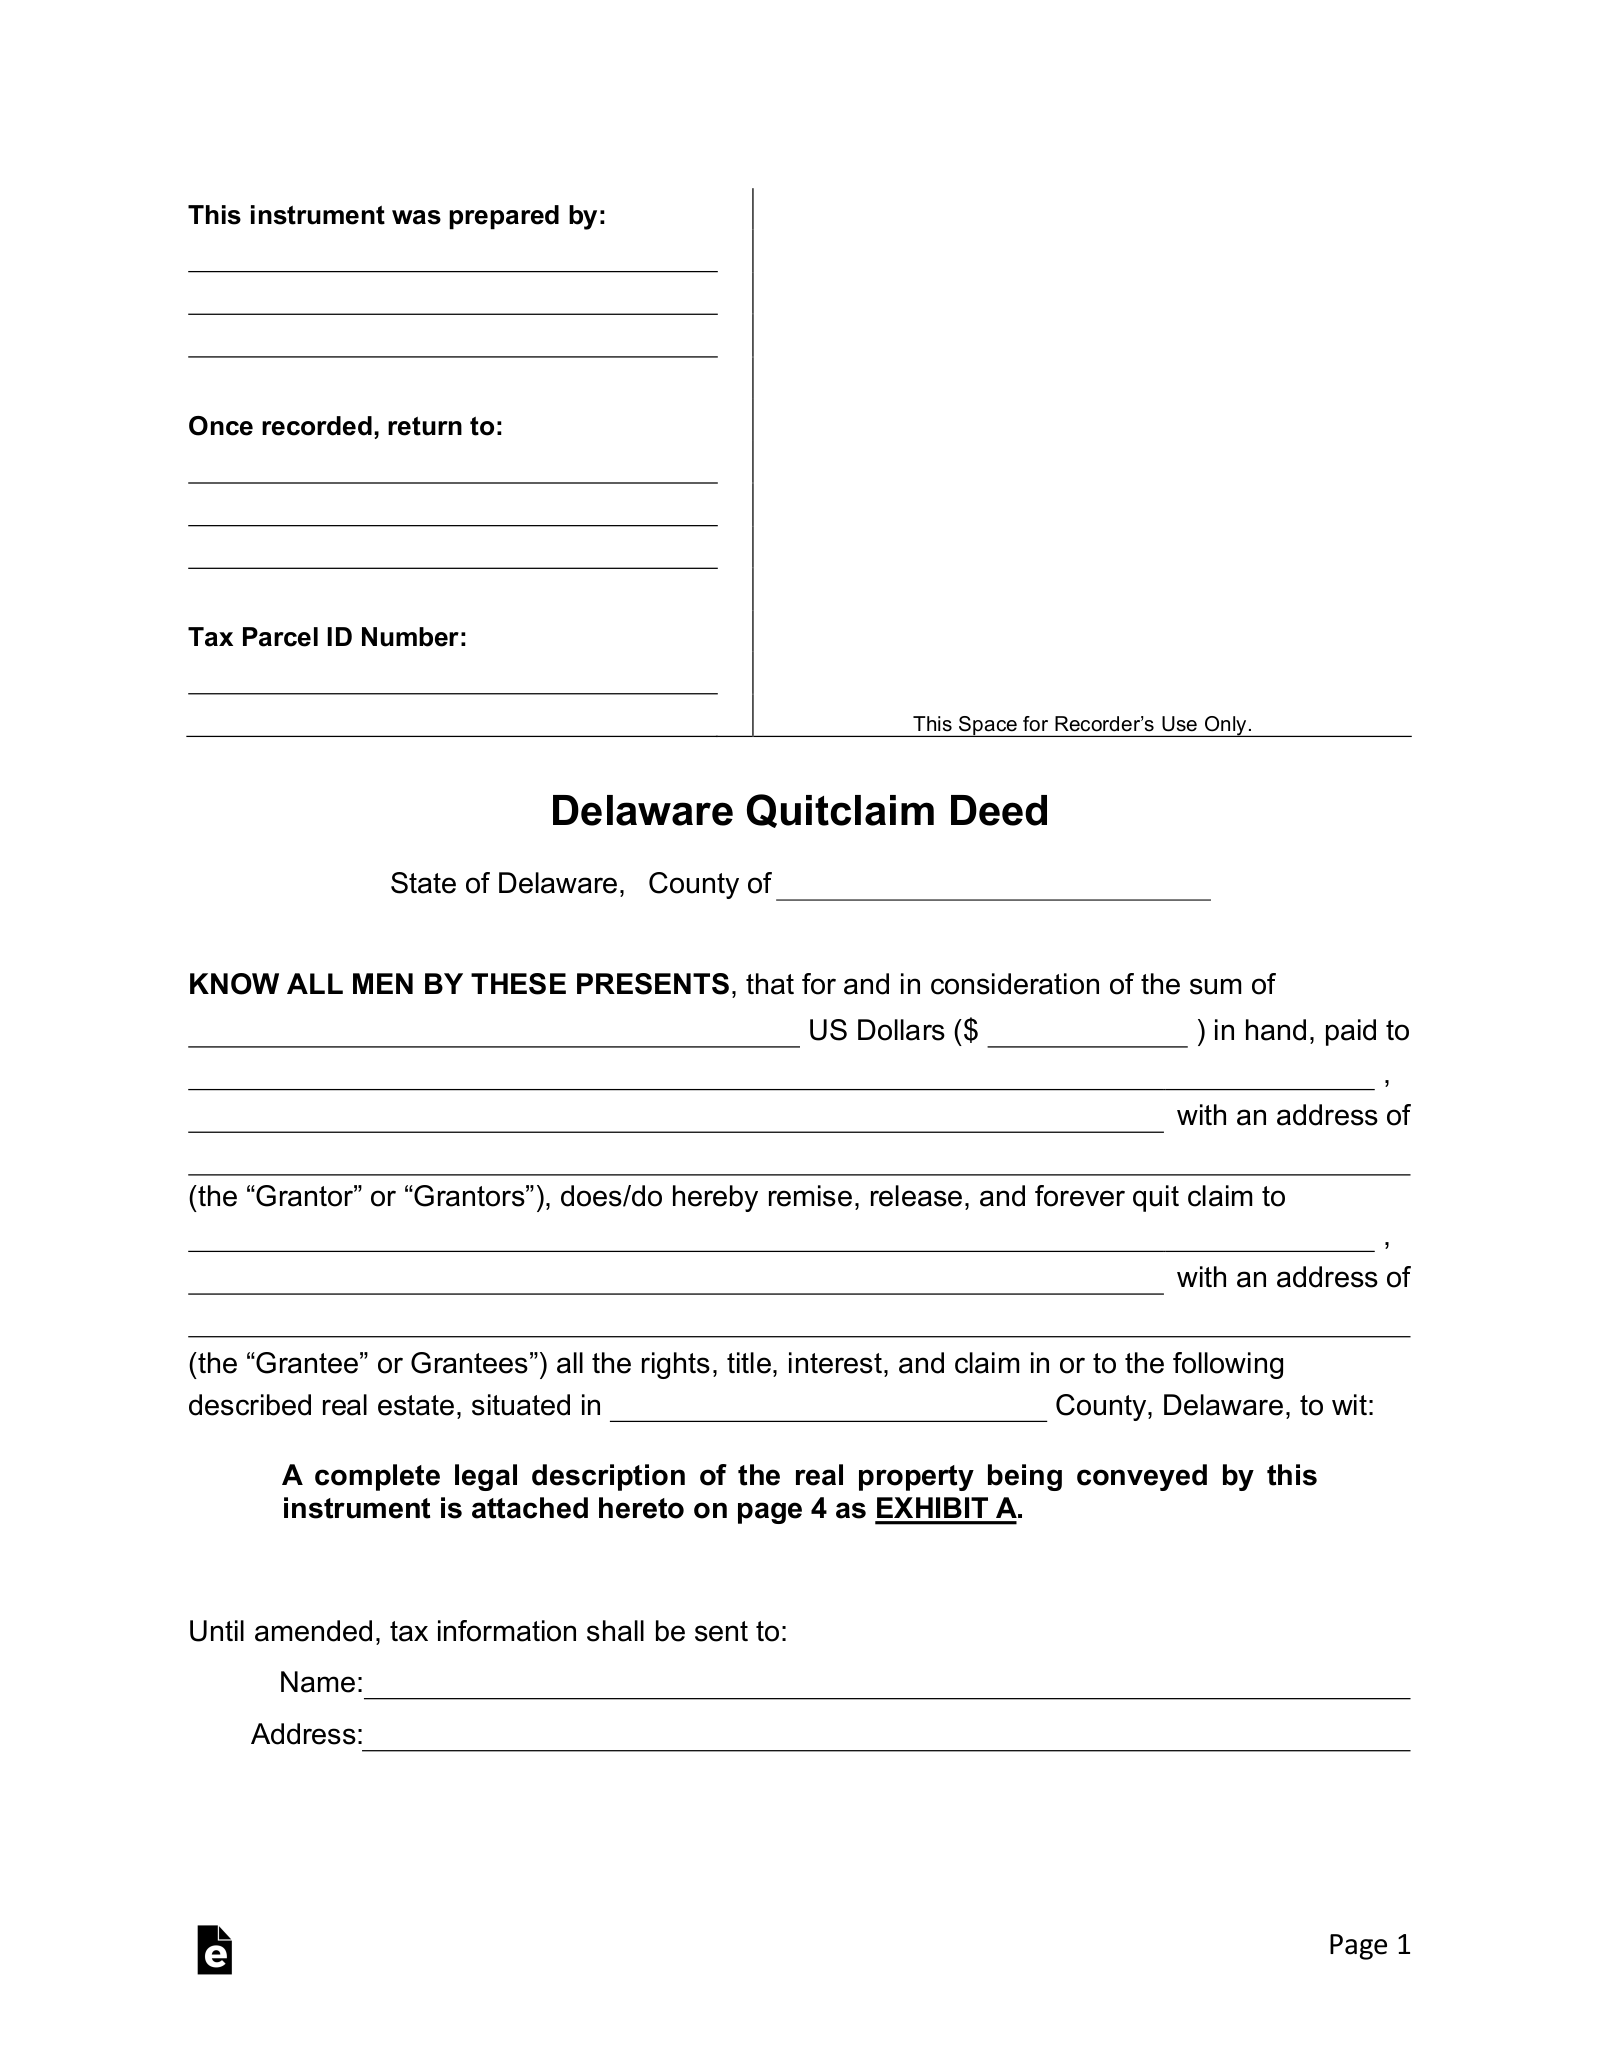 Delaware Quit Claim Deed Form